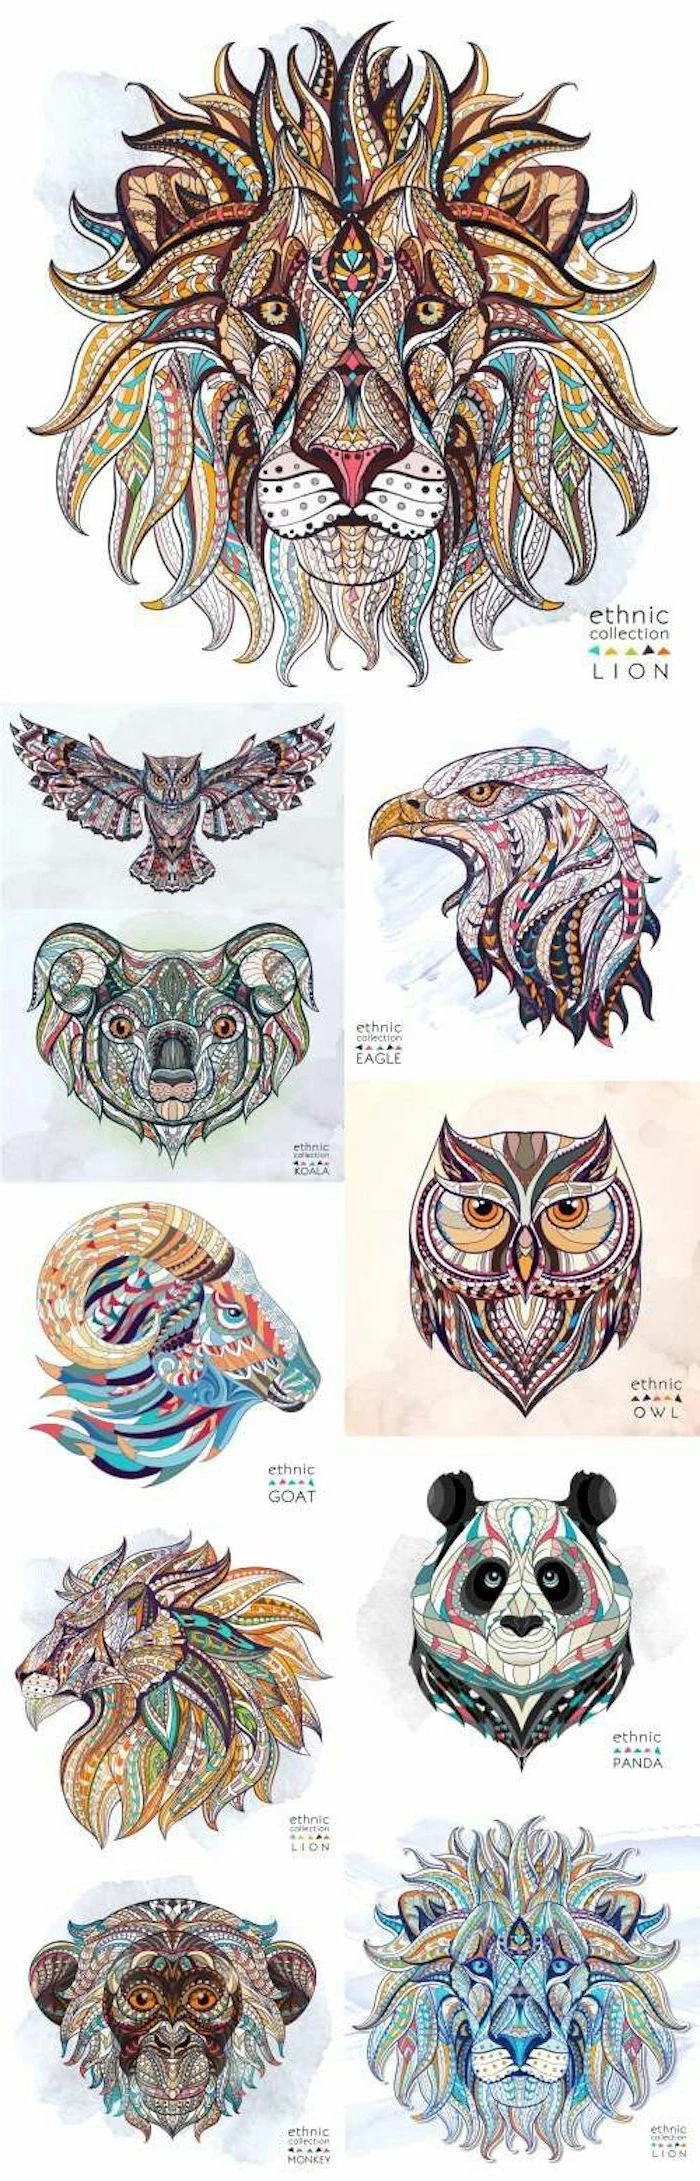 colourful animal head drawings, tattoo designs for men, white background